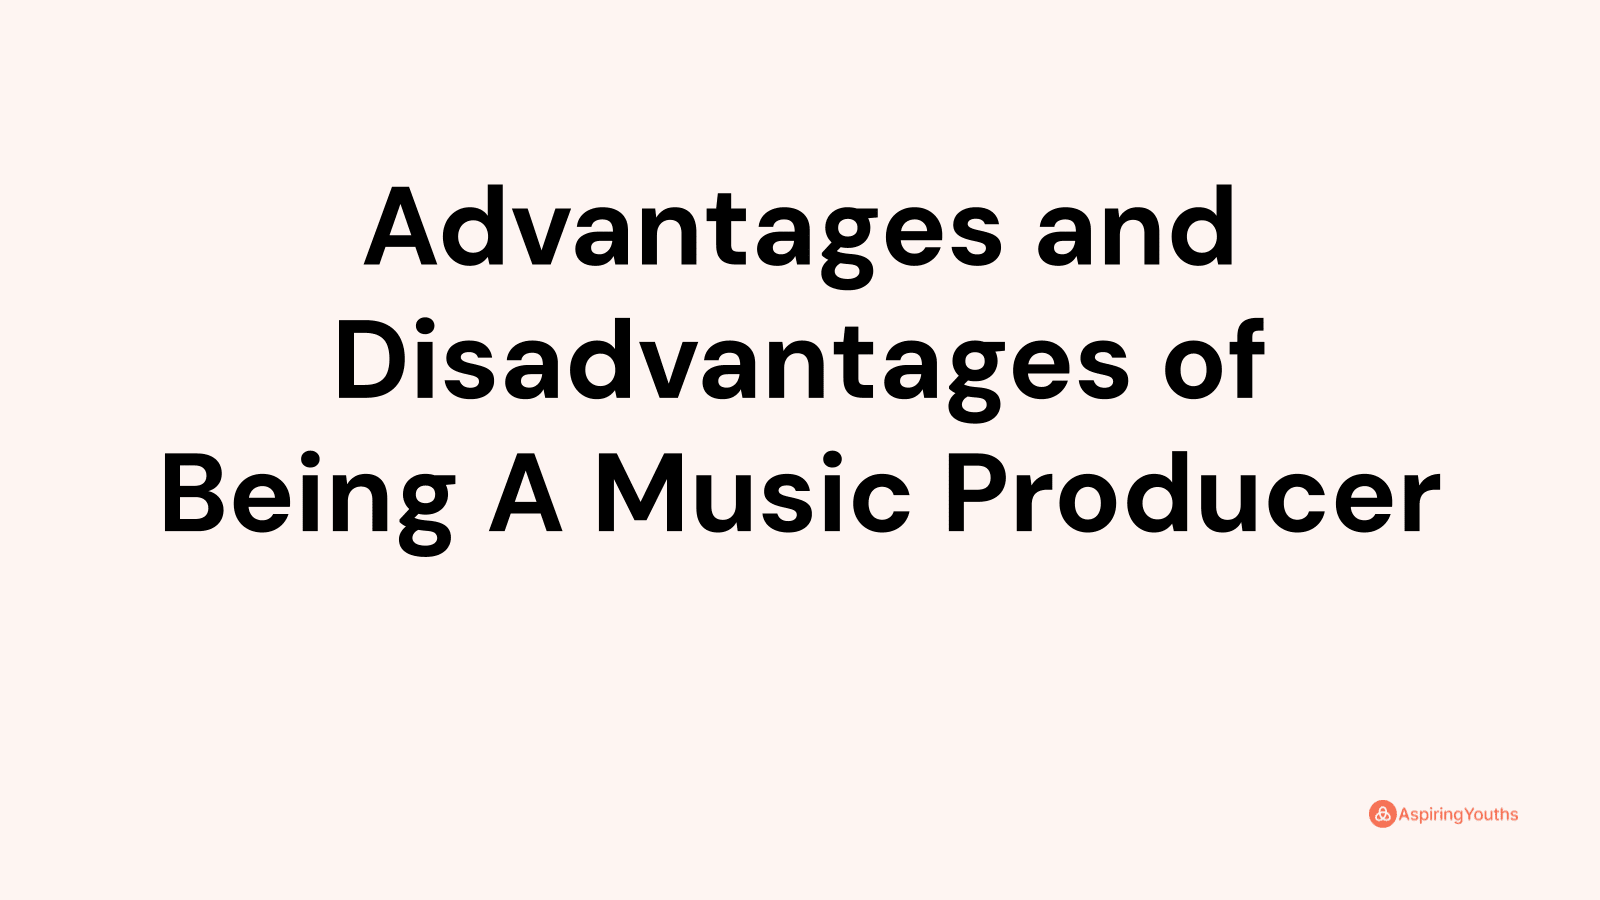 Advantages and disadvantages of Being A Music Producer